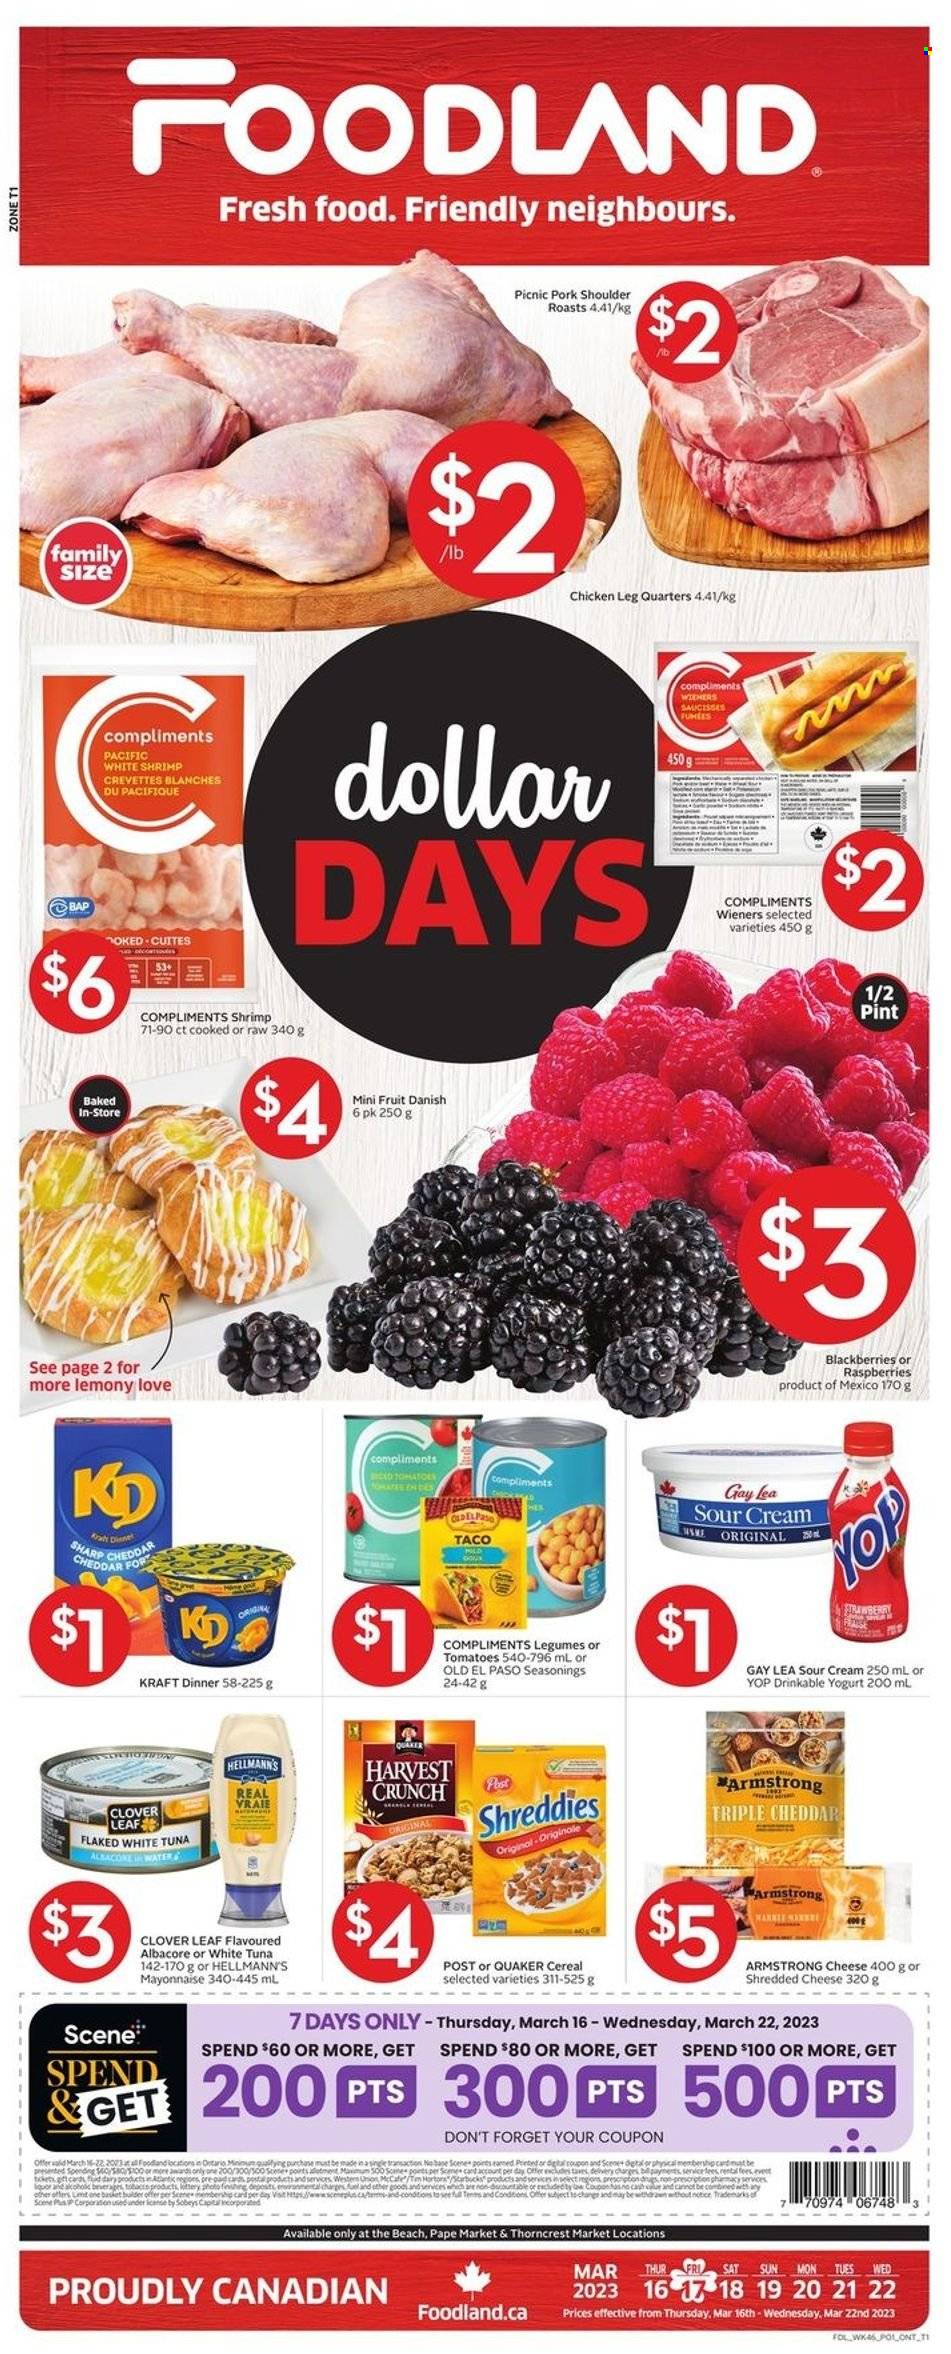 thumbnail - Foodland Flyer - March 16, 2023 - March 22, 2023 - Sales products - Old El Paso, tomatoes, blackberries, tuna, shrimps, Quaker, Kraft®, shredded cheese, cheddar, yoghurt, Clover, sour cream, mayonnaise, Hellmann’s, 7 Days, cereals, water, Starbucks, McCafe, chicken legs, pork meat, pork shoulder, basket. Page 1.